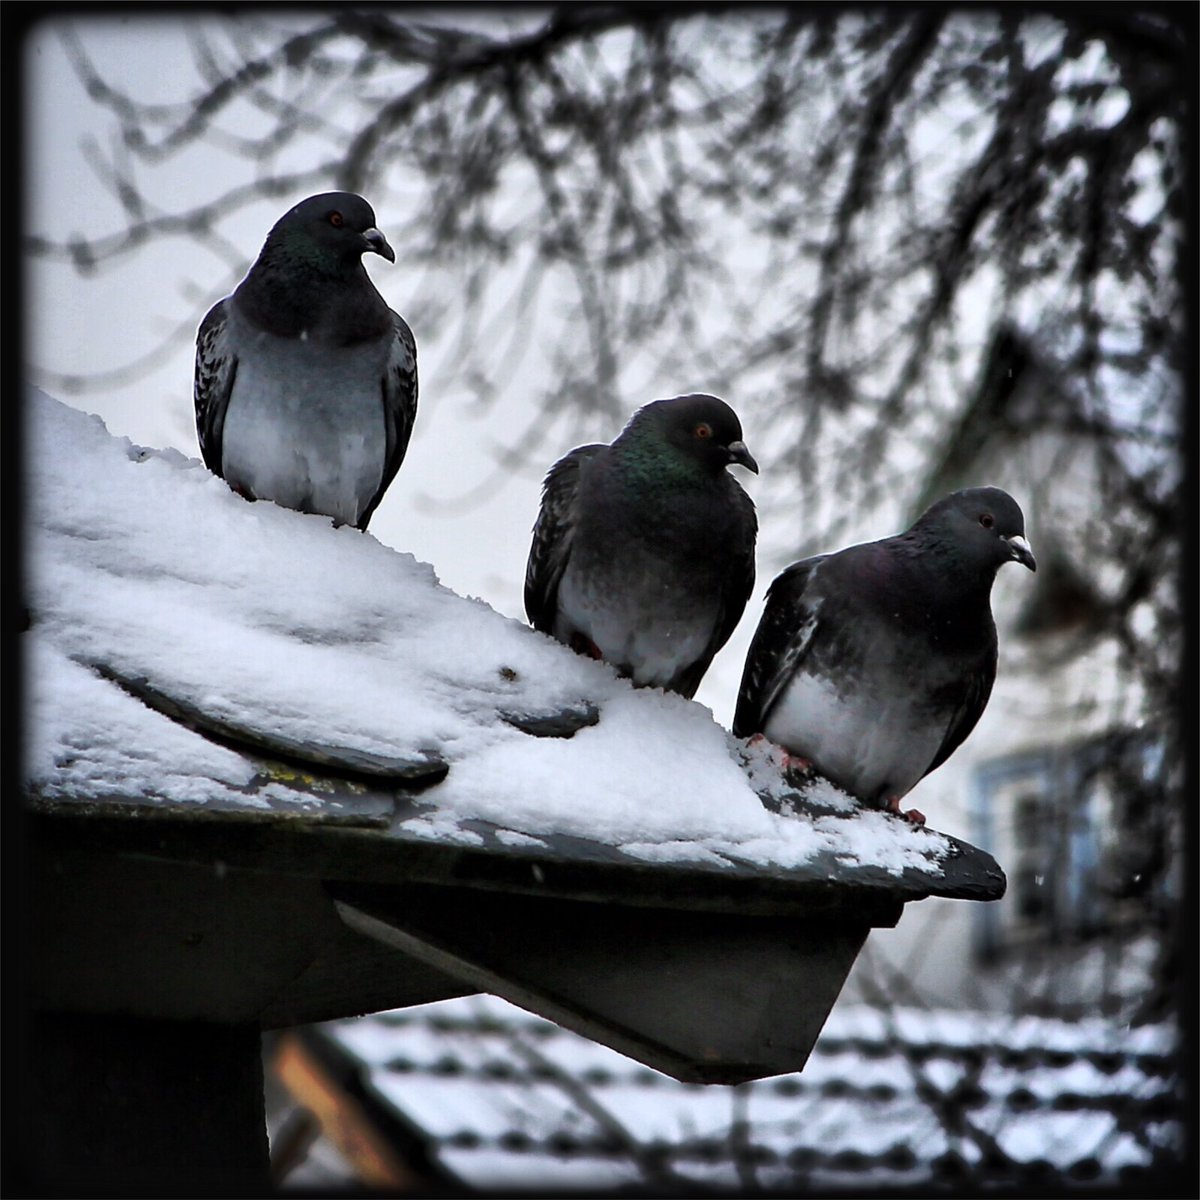 ... tres amigos ... #pigeons #roof #snow #frost #wintermemories #stilllife #animals #birds #nature #urban #mood #atmosphere #dream #silence #peace #symbol #friendship